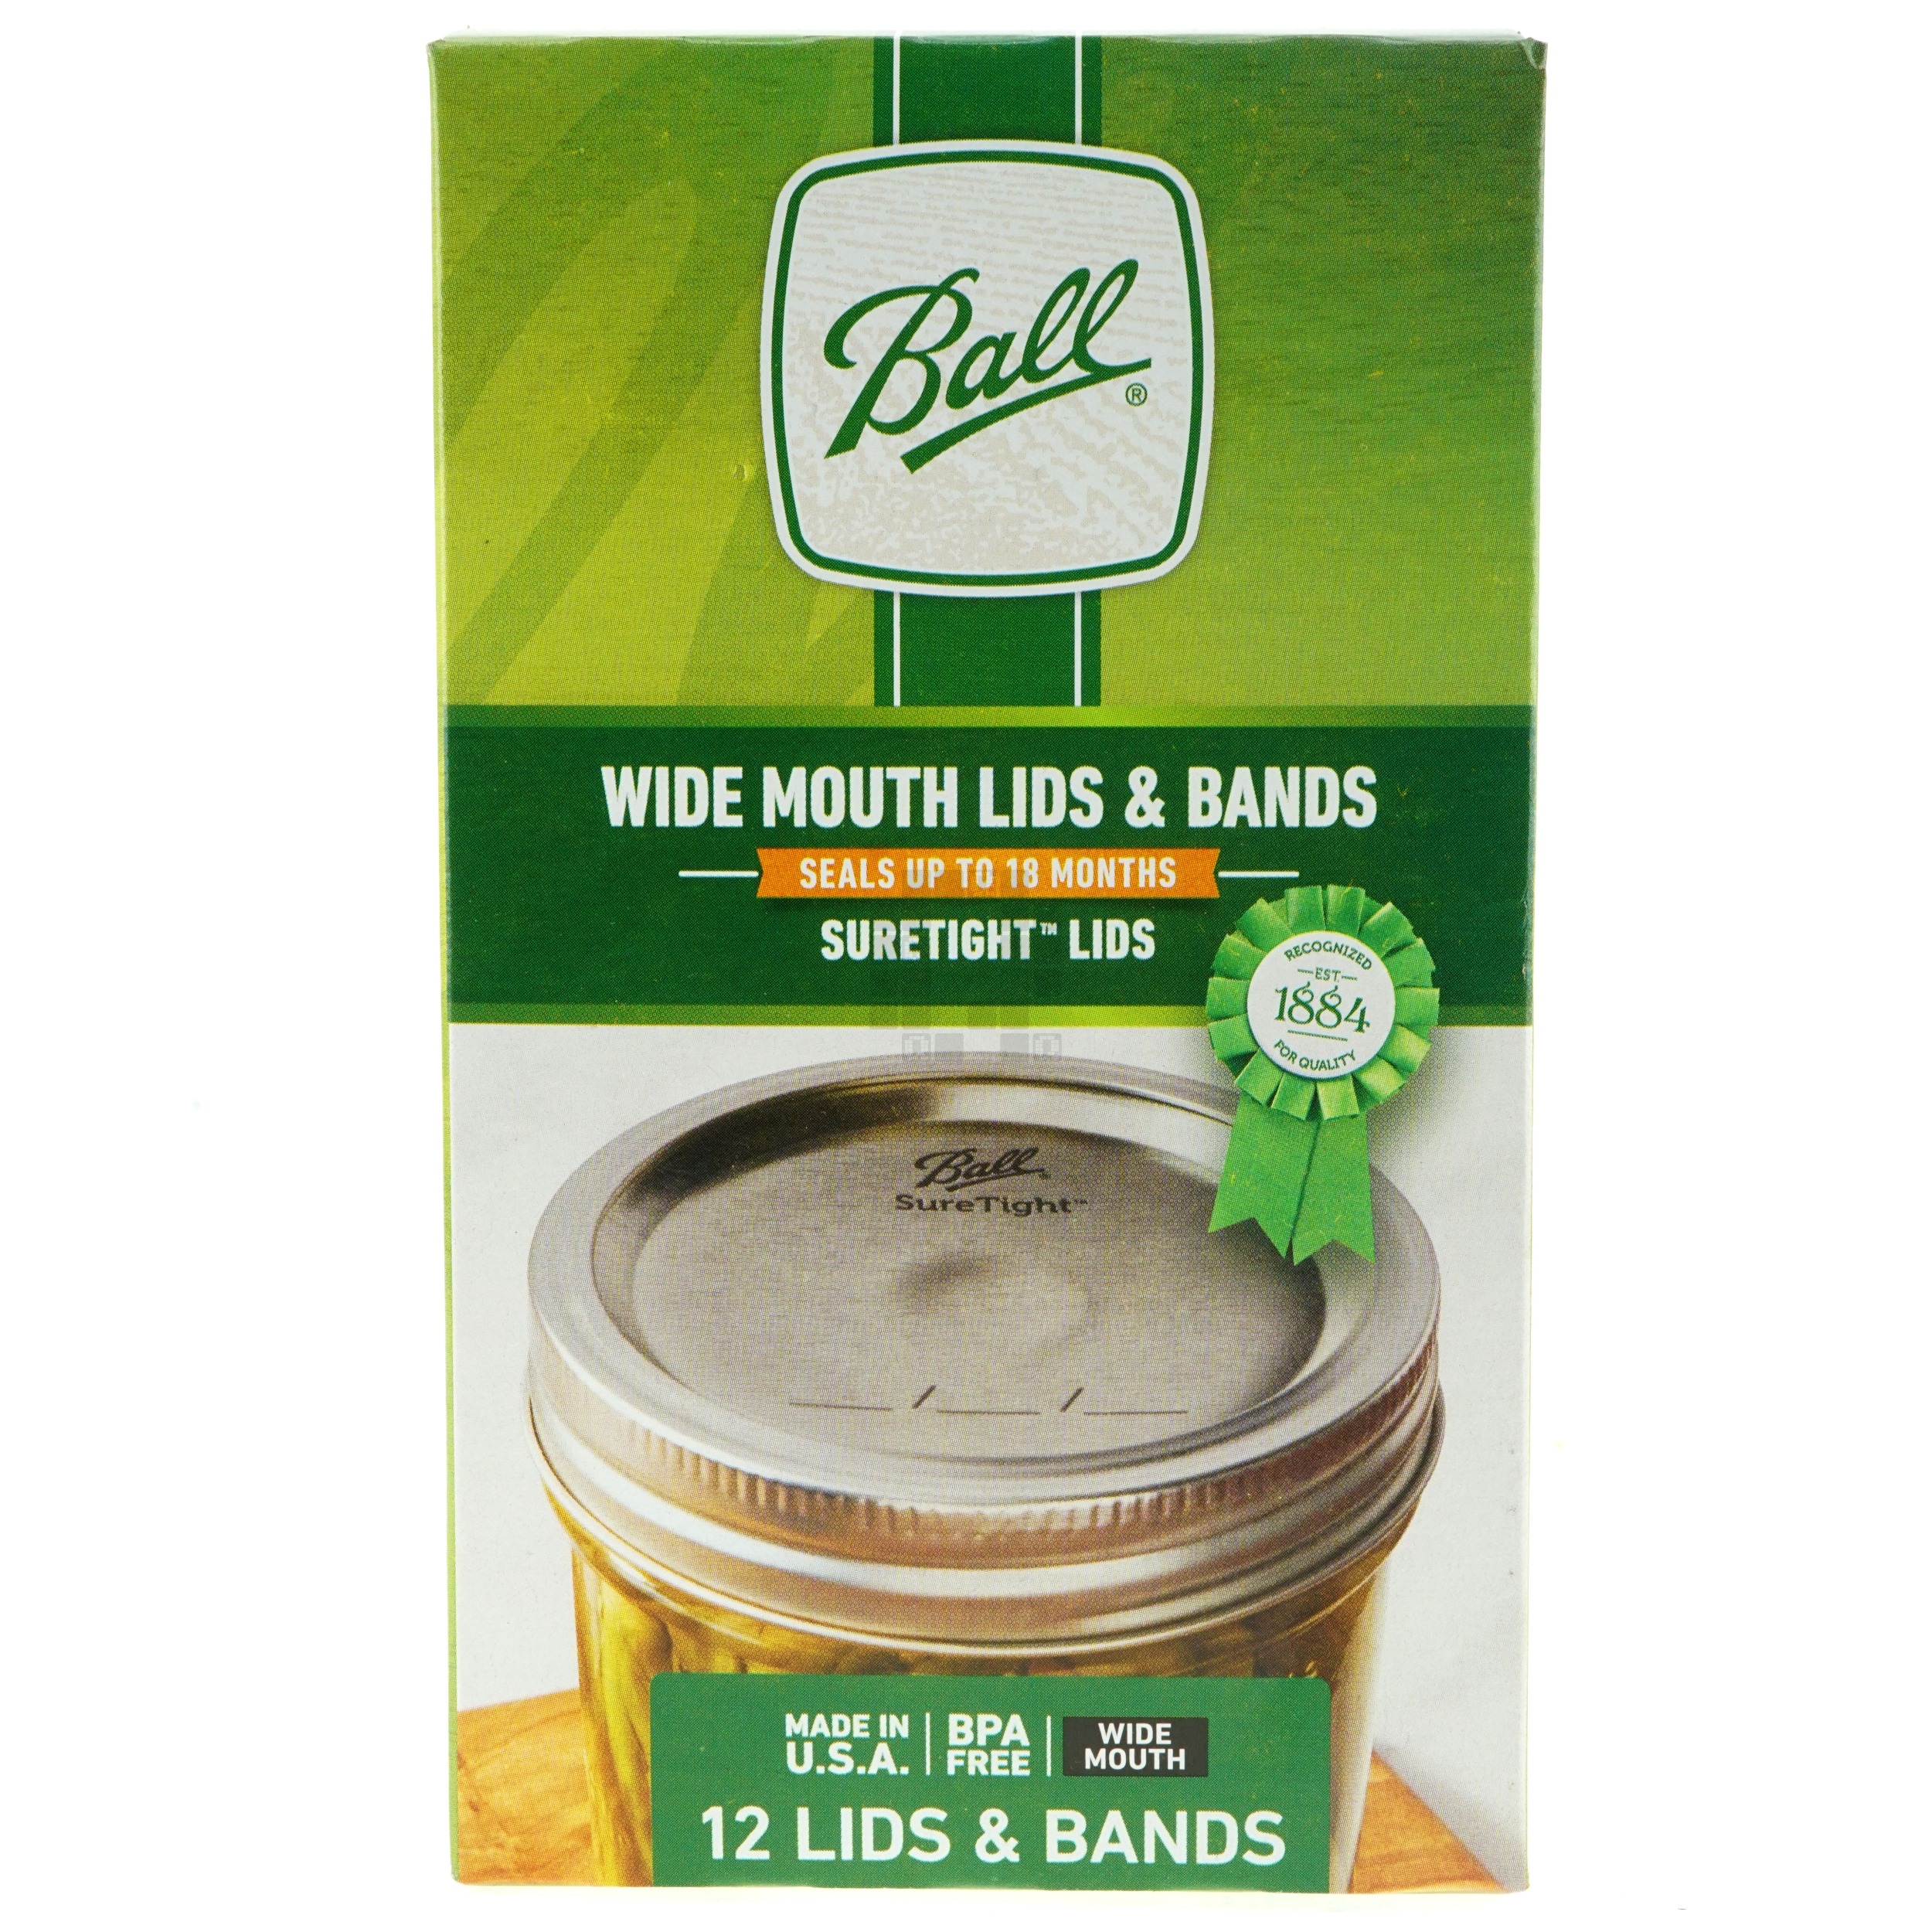 Ball 40000 Wide Mouth Canning Jar Lids and Bands. 12 Lids and Bands